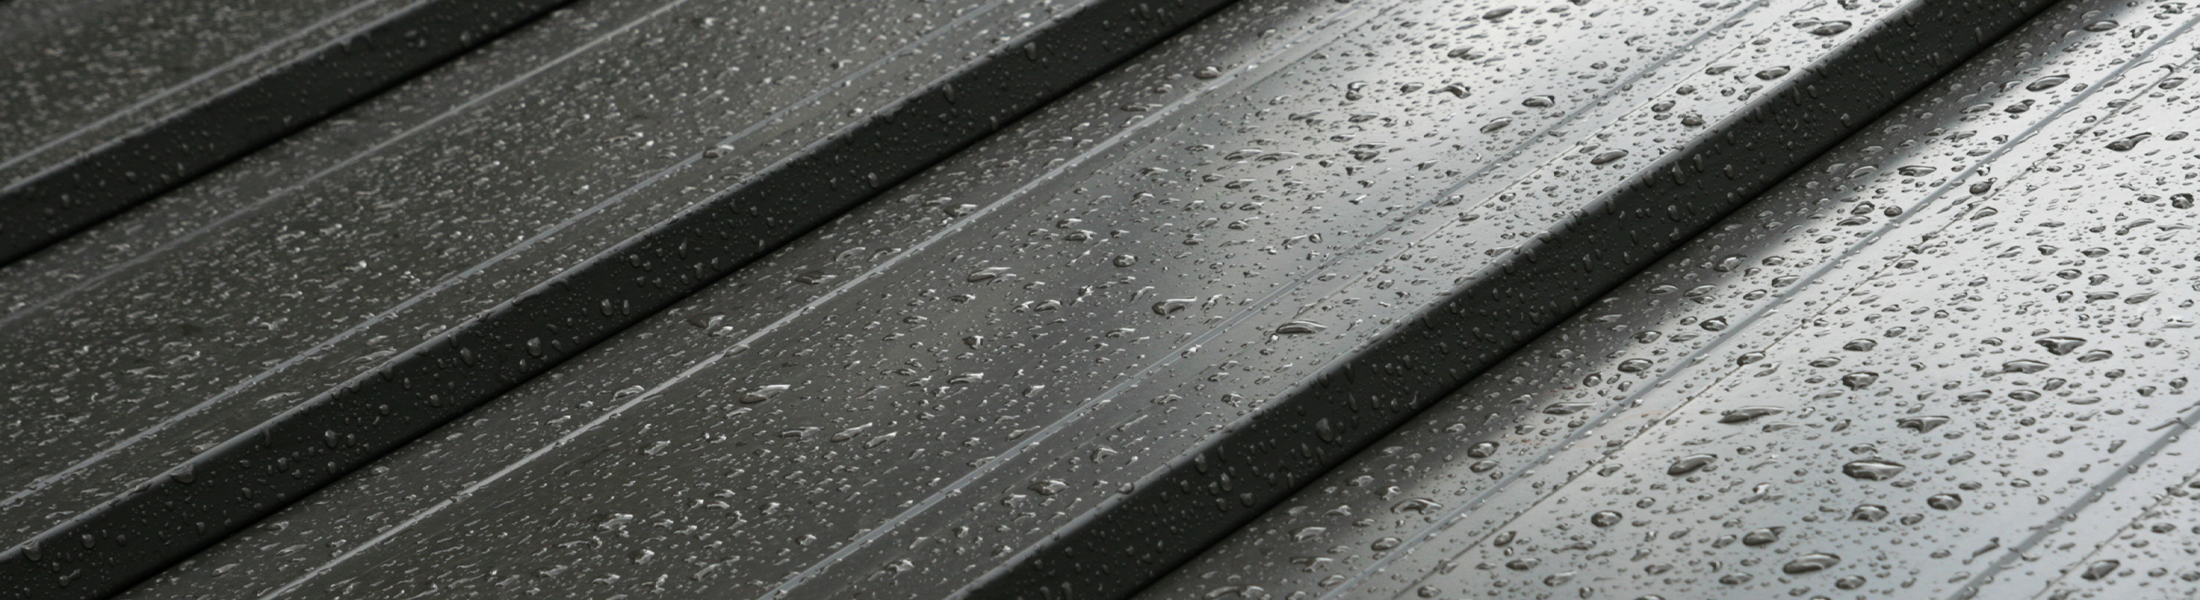 Close up of metal roof panels covered in rain